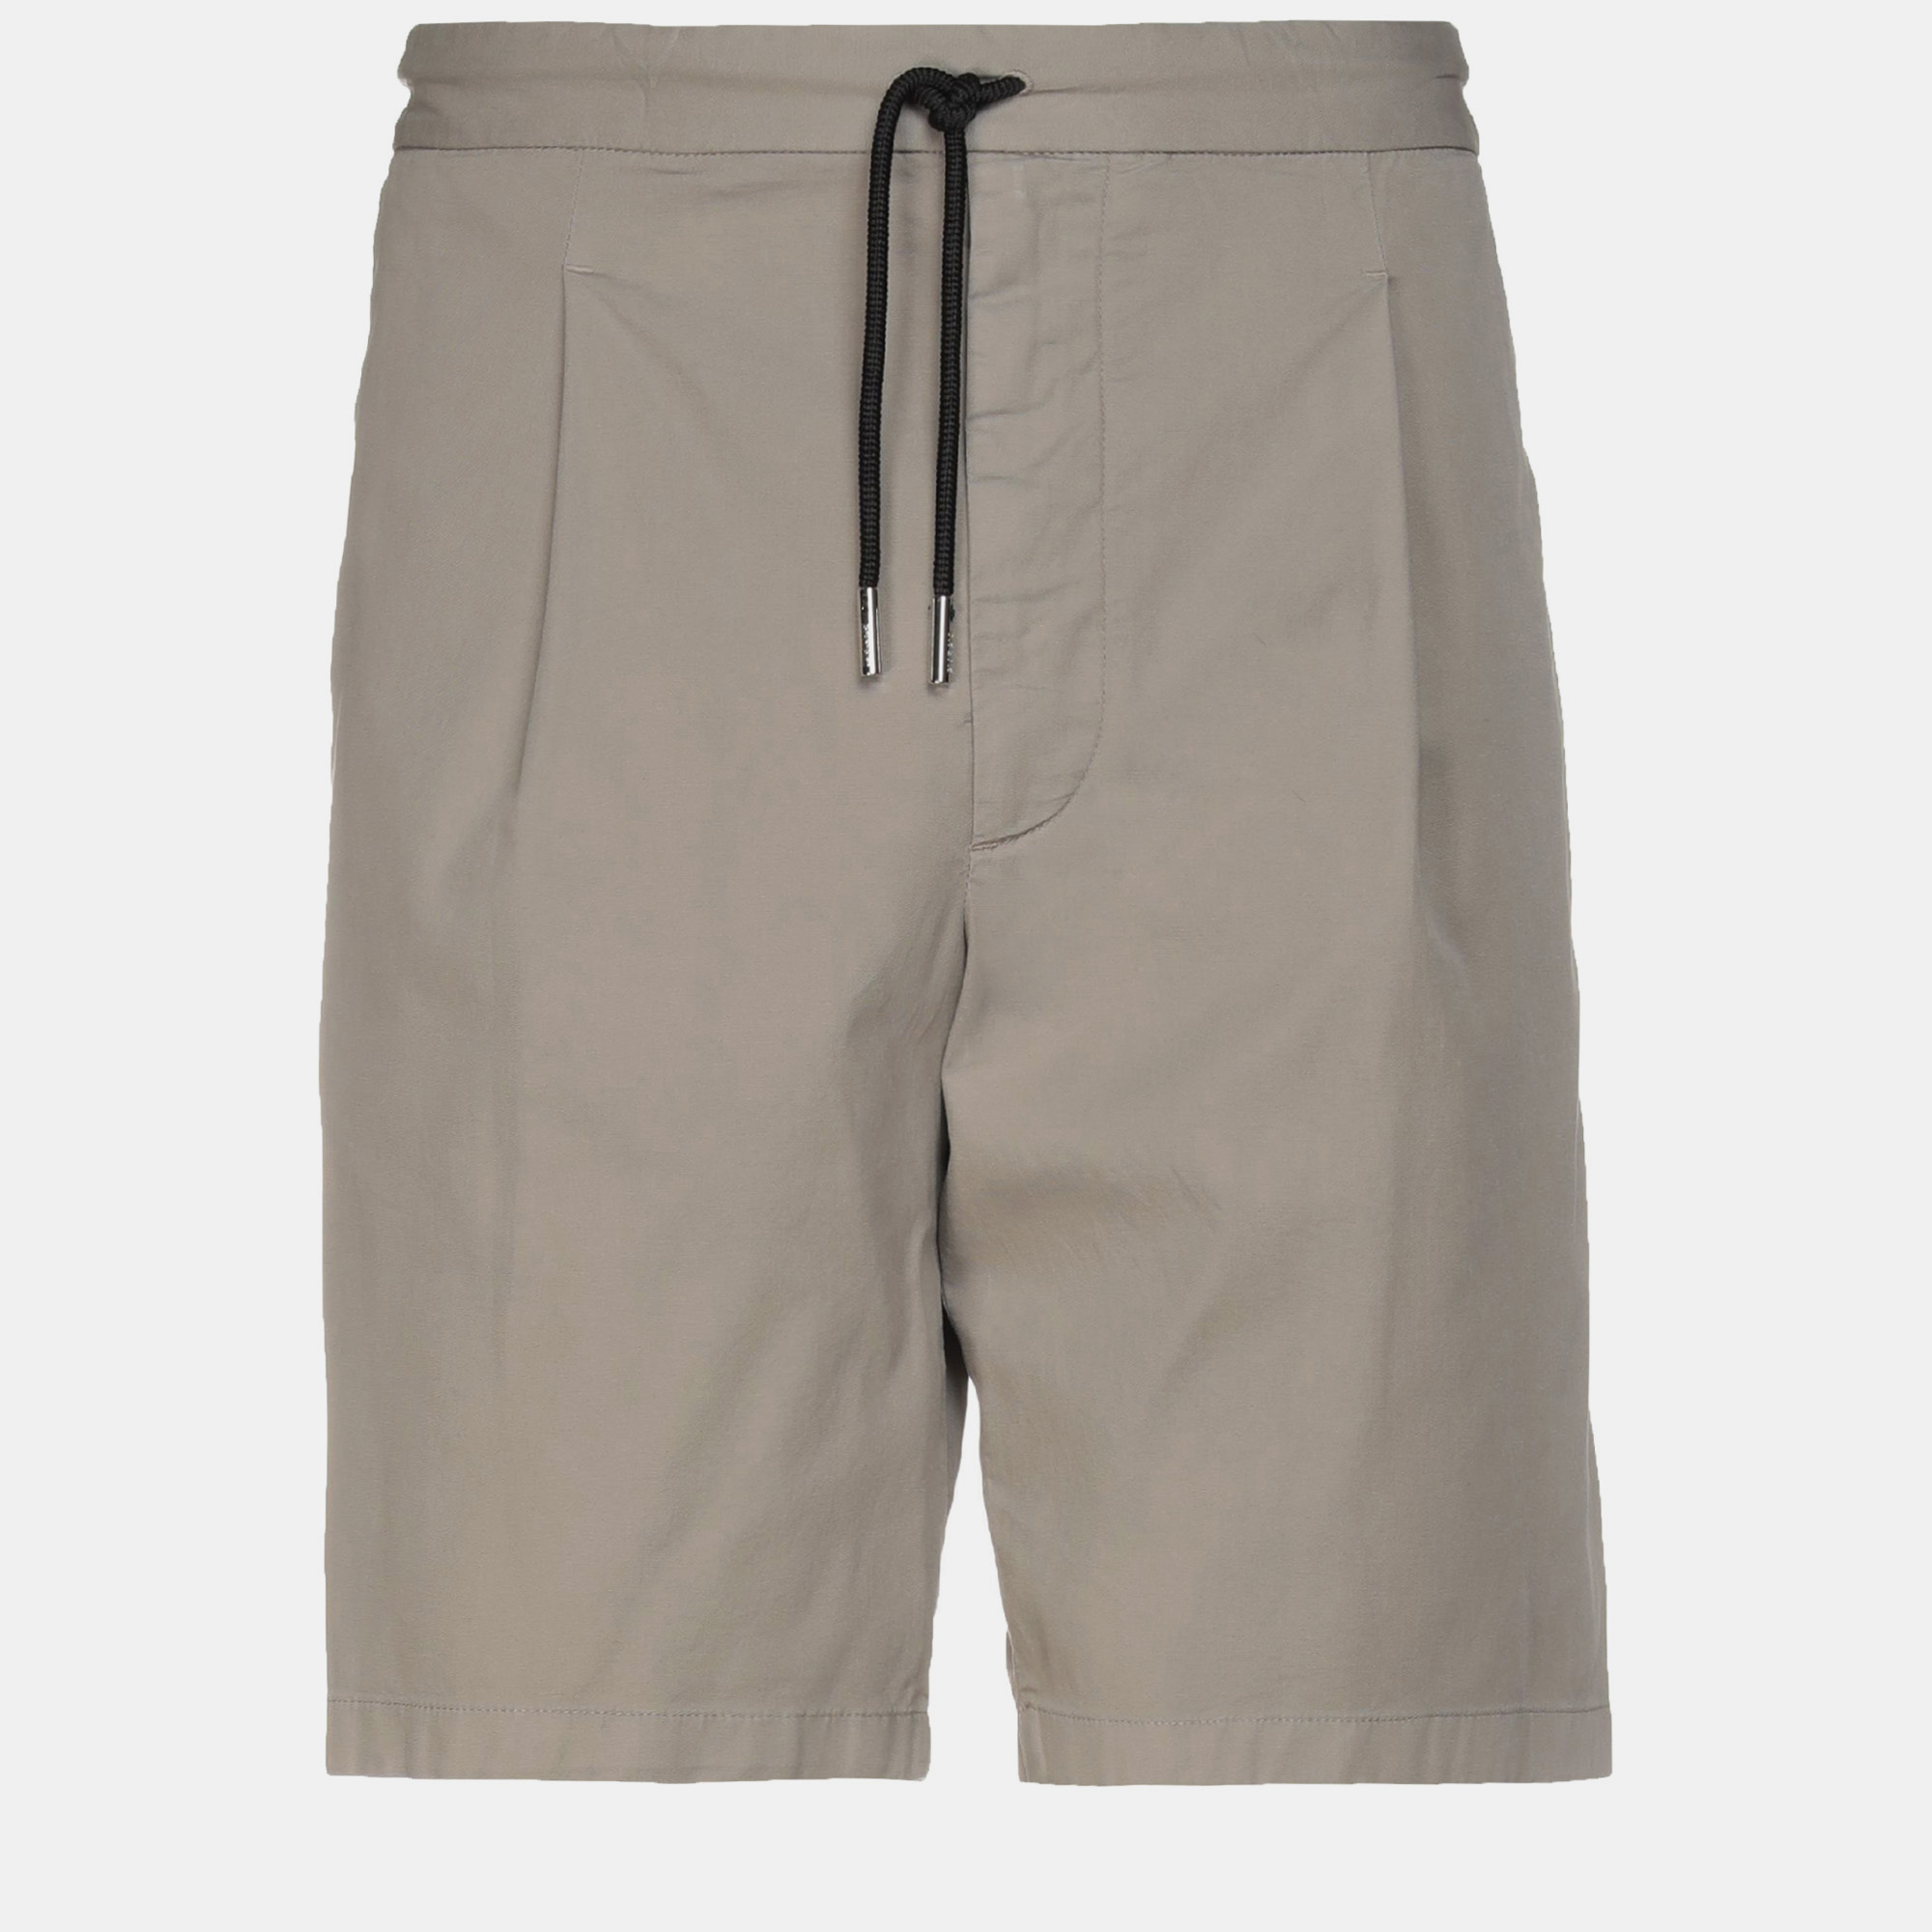 Sophistication blends with expert tailoring in these designer shorts. Made from premium materials they provide a sleek silhouette and enduring comfort. Perfect for versatile styling theyre a wardrobe essential youll reach for time and again.